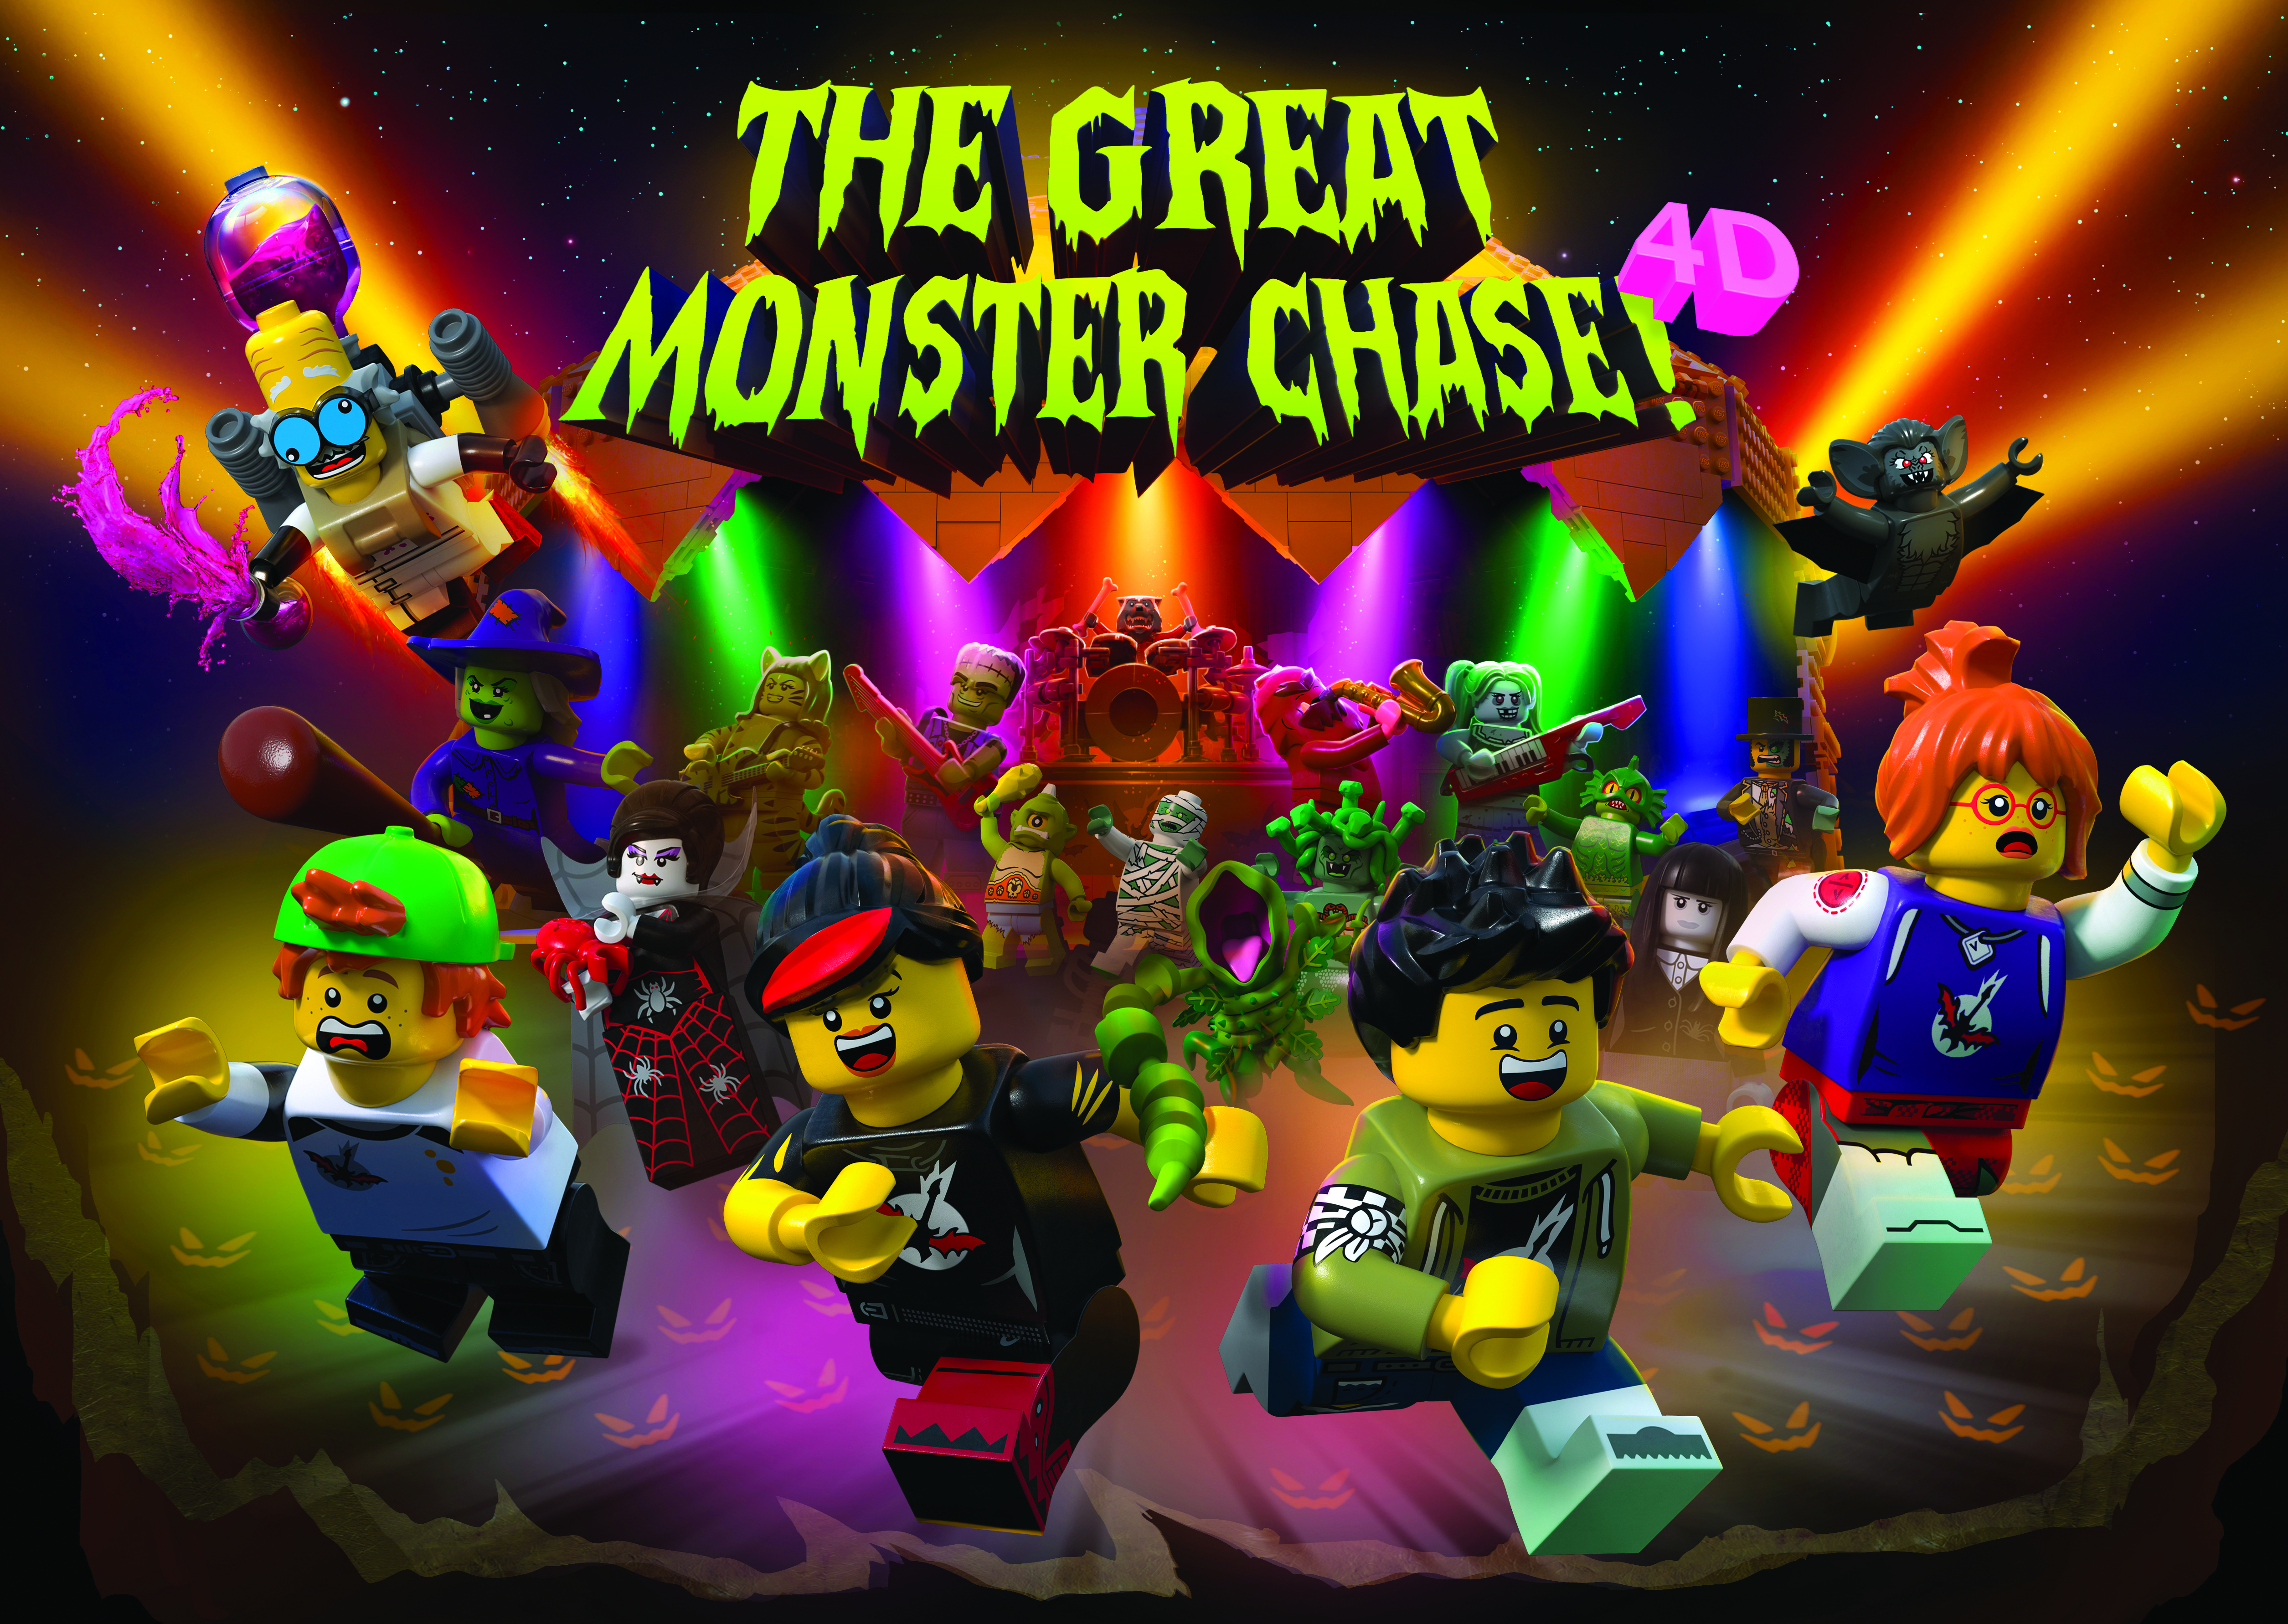 4D Film: The Great Monster Chase